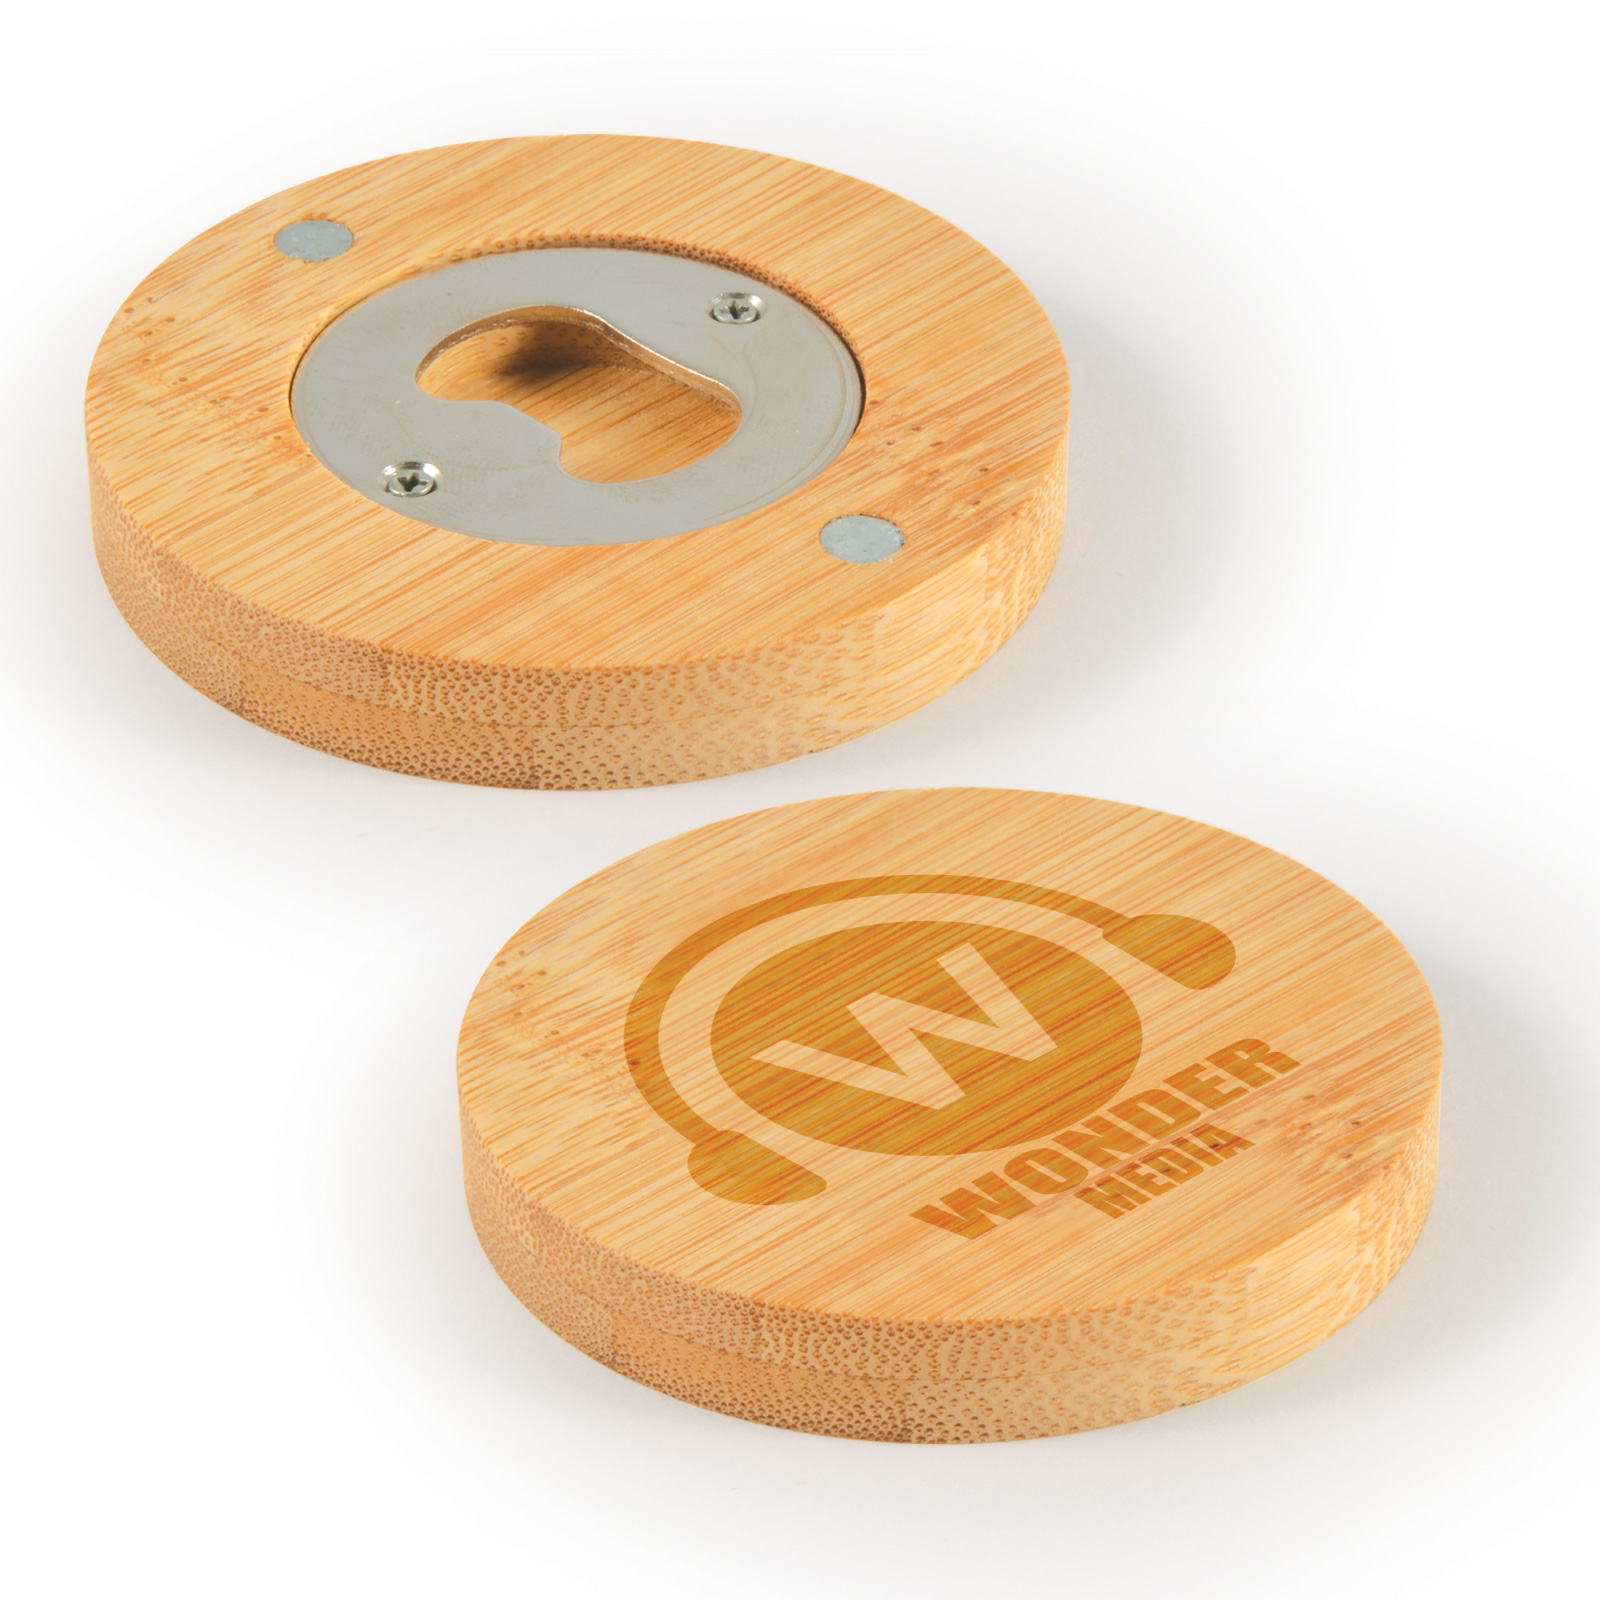 LL4998 - Discus Bamboo Bottle Opener Coaster 